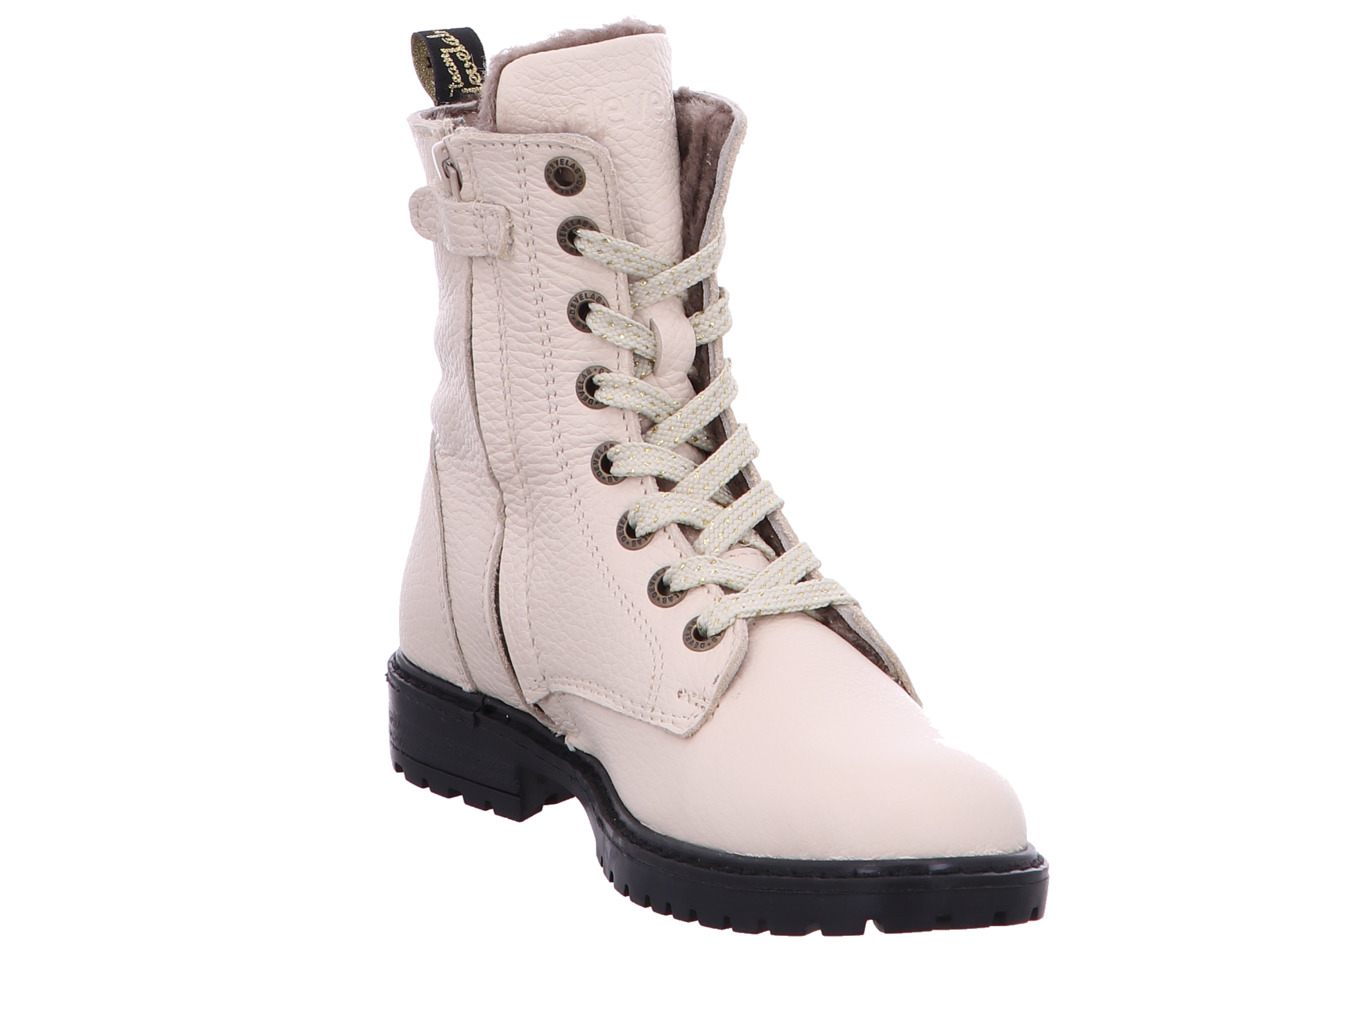 develab_girls_mid_boot_laces_42846_222_6141